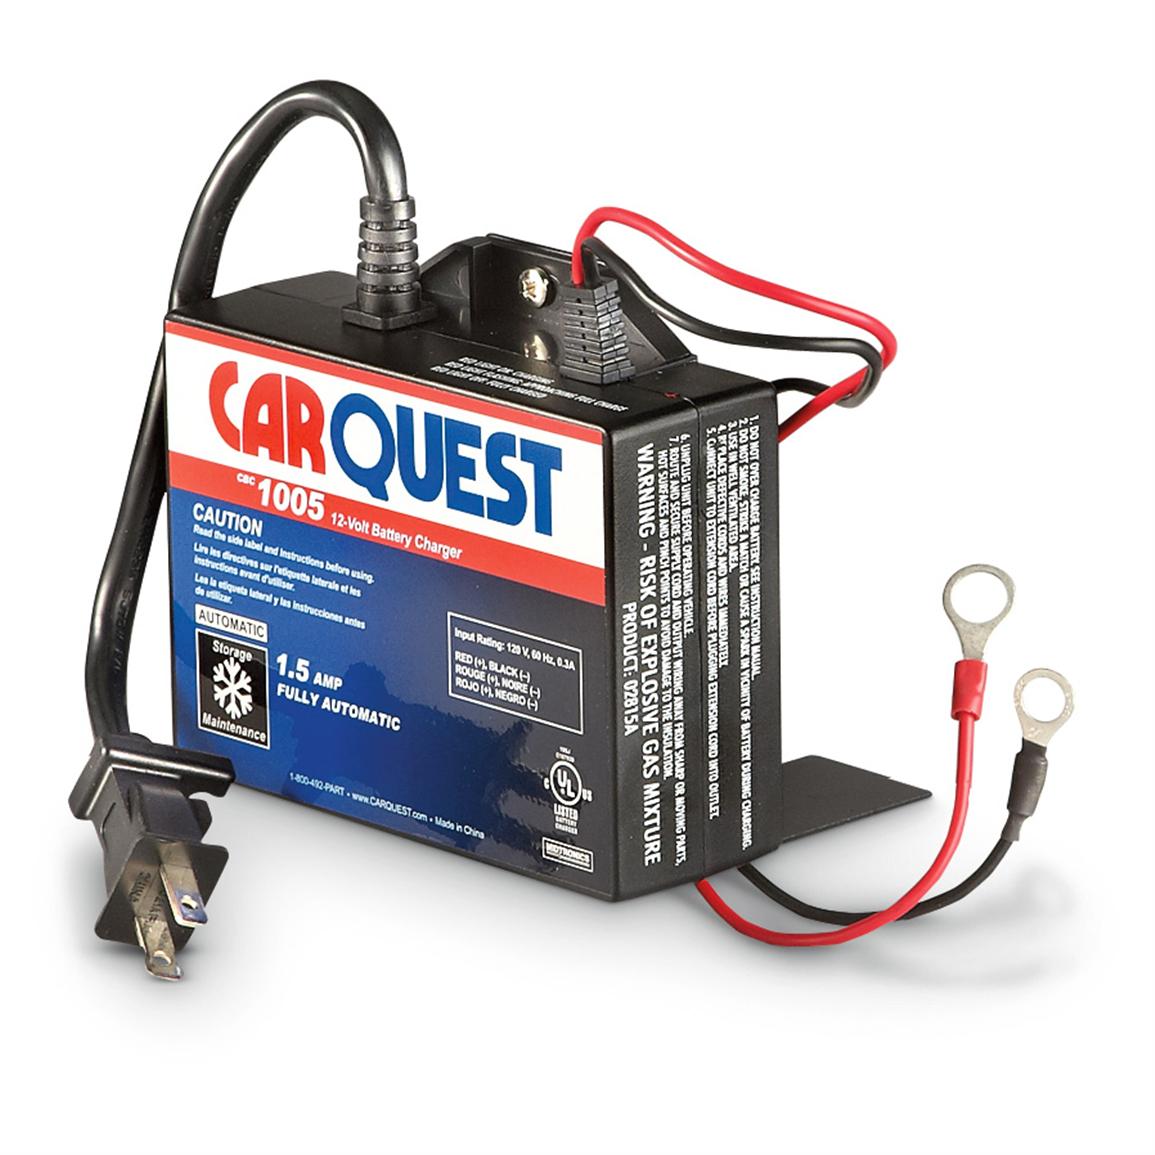 Carquest 1 5 Amp Automatic Battery Charger Chargers Jump Starters At Sportsman S Guide